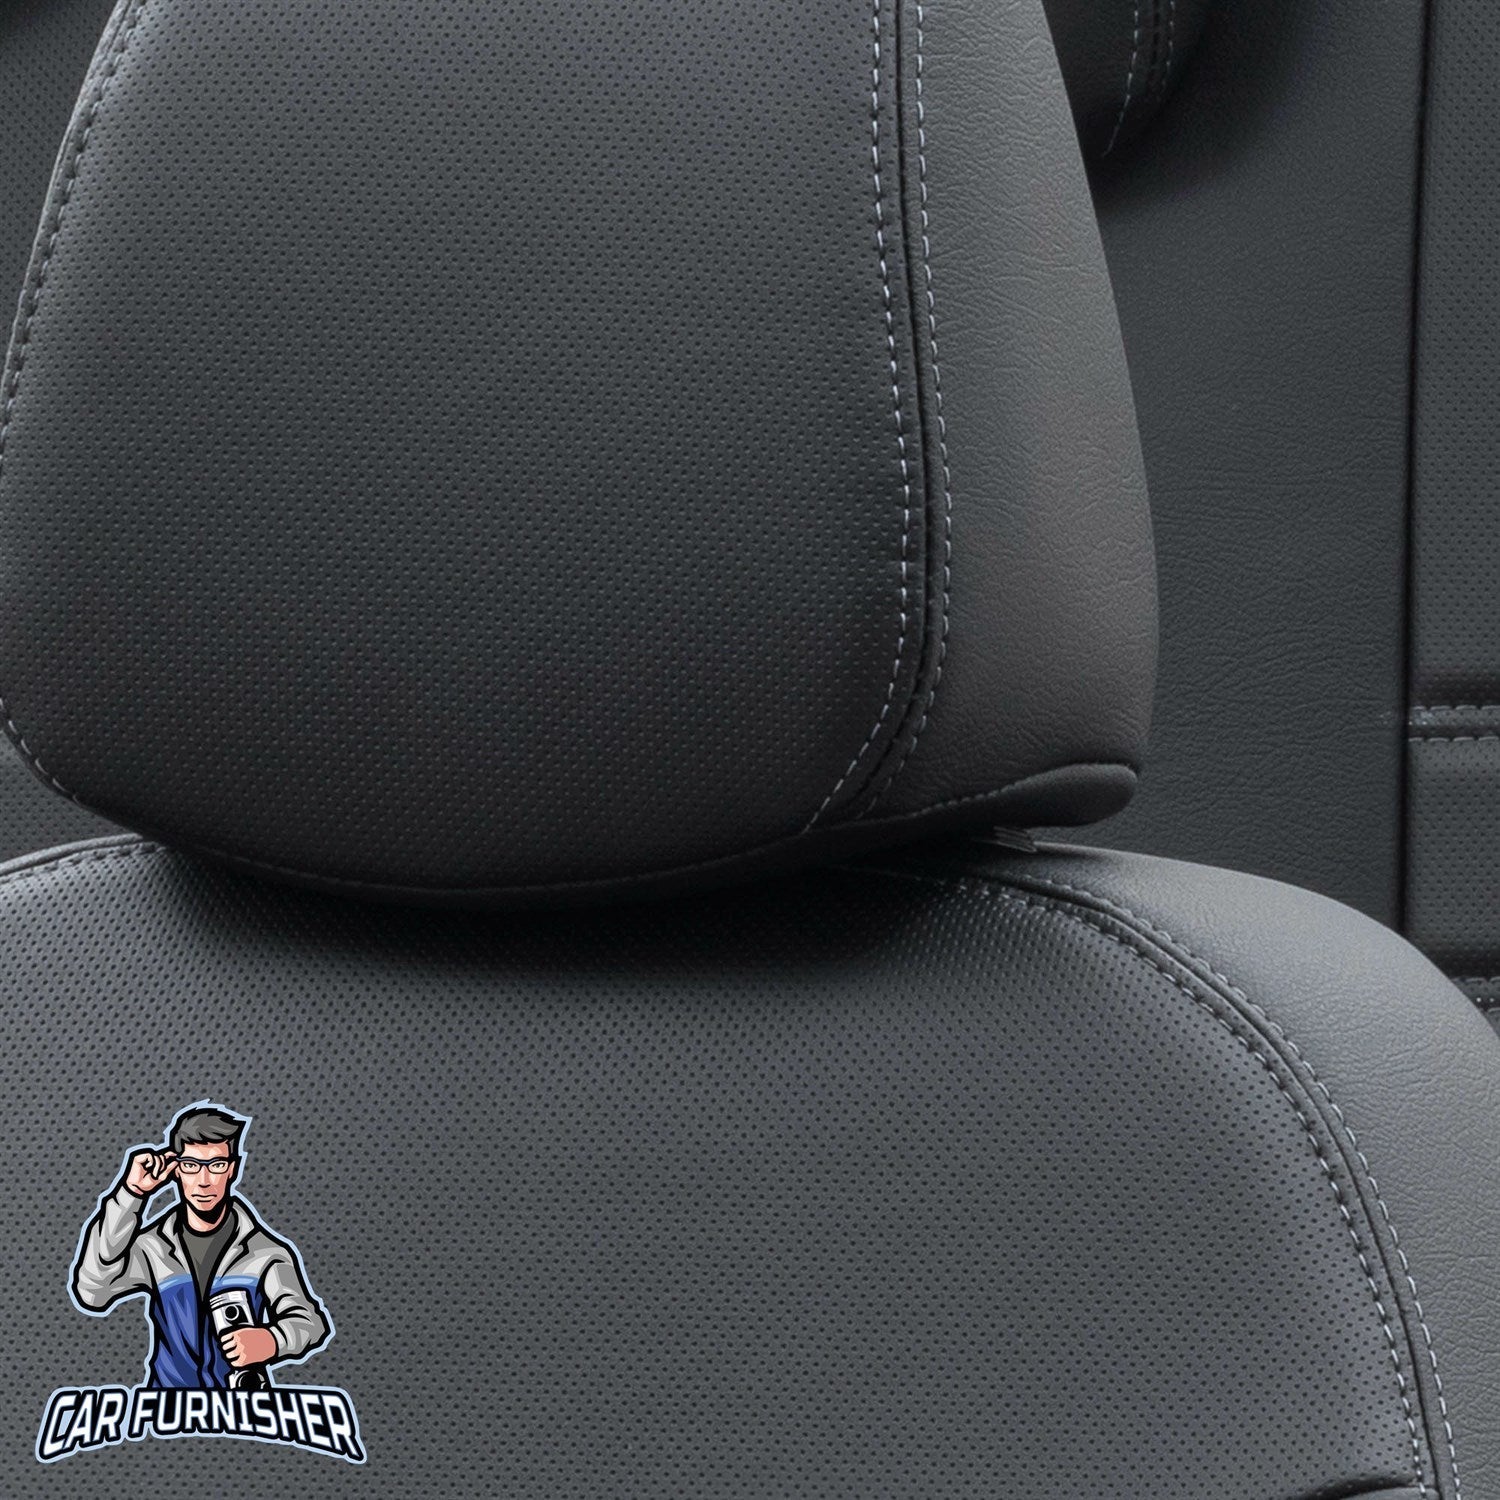 Peugeot 107 Seat Covers Istanbul Leather Design Black Leather